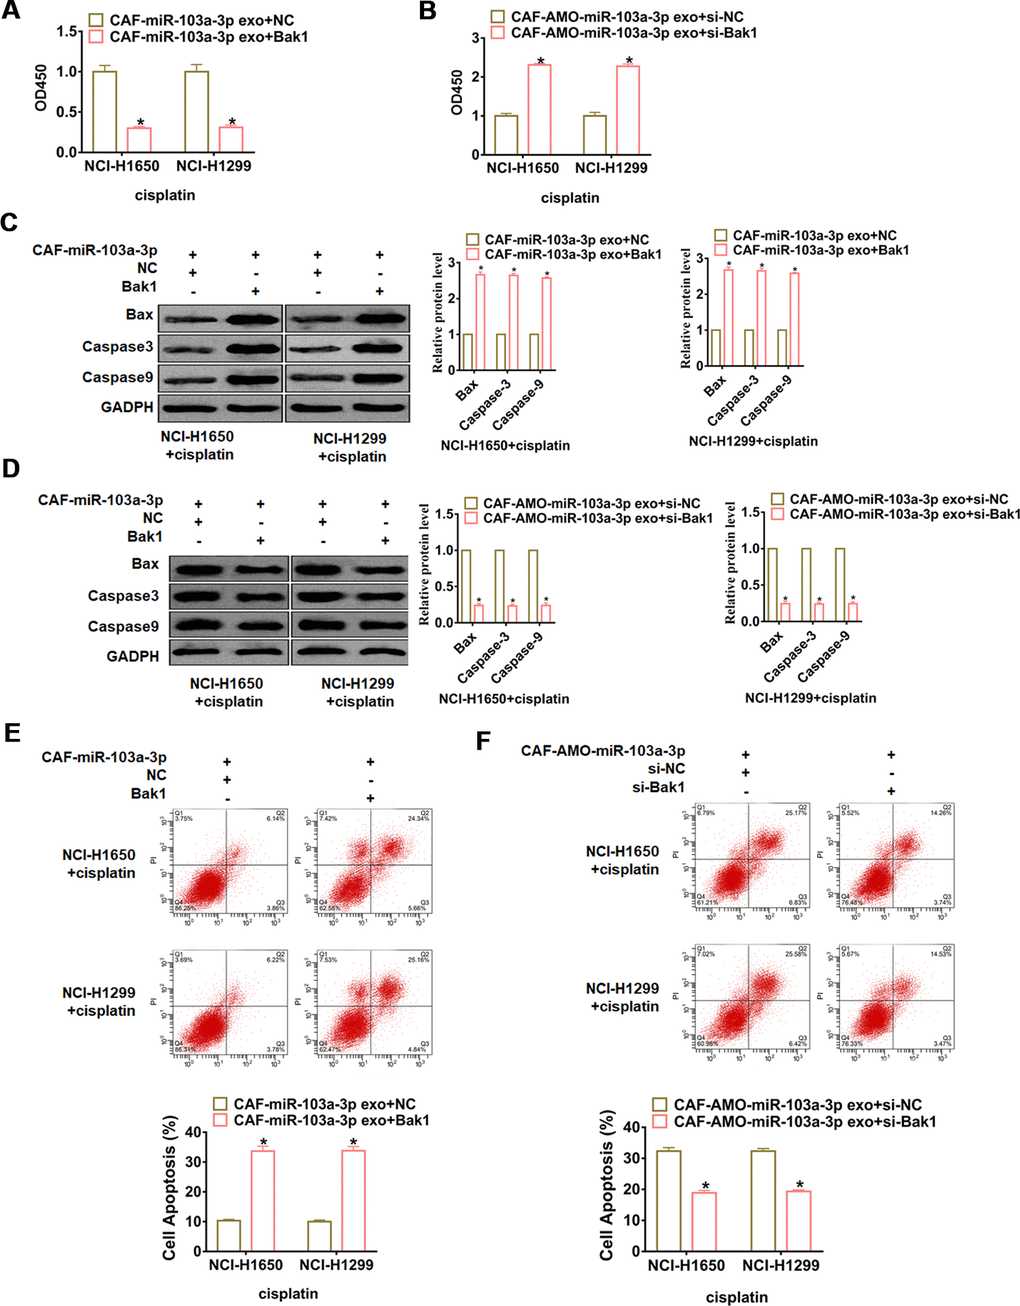 miR-103a-3p promotes cisplatin resistance in NSCLC cells by inhibiting Bak1. NCI-H1650 and NCI-H1299 cells were transfected with Bak1 or si- Bak1 and incubated with exosomes from CAFs transfected with miR-103a-3p or AMO-103a-3p, respectively. (A, B) CCK8 was used to test viability of NCI-H1650 and NCI-H1299 cells. (C, D) The expressions of apoptosis related protein Bax, Caspase3 and Caspase9 were analyzed by western bolt. (E, F) The number of apoptotic cells was calculated by flow cytometry. *p